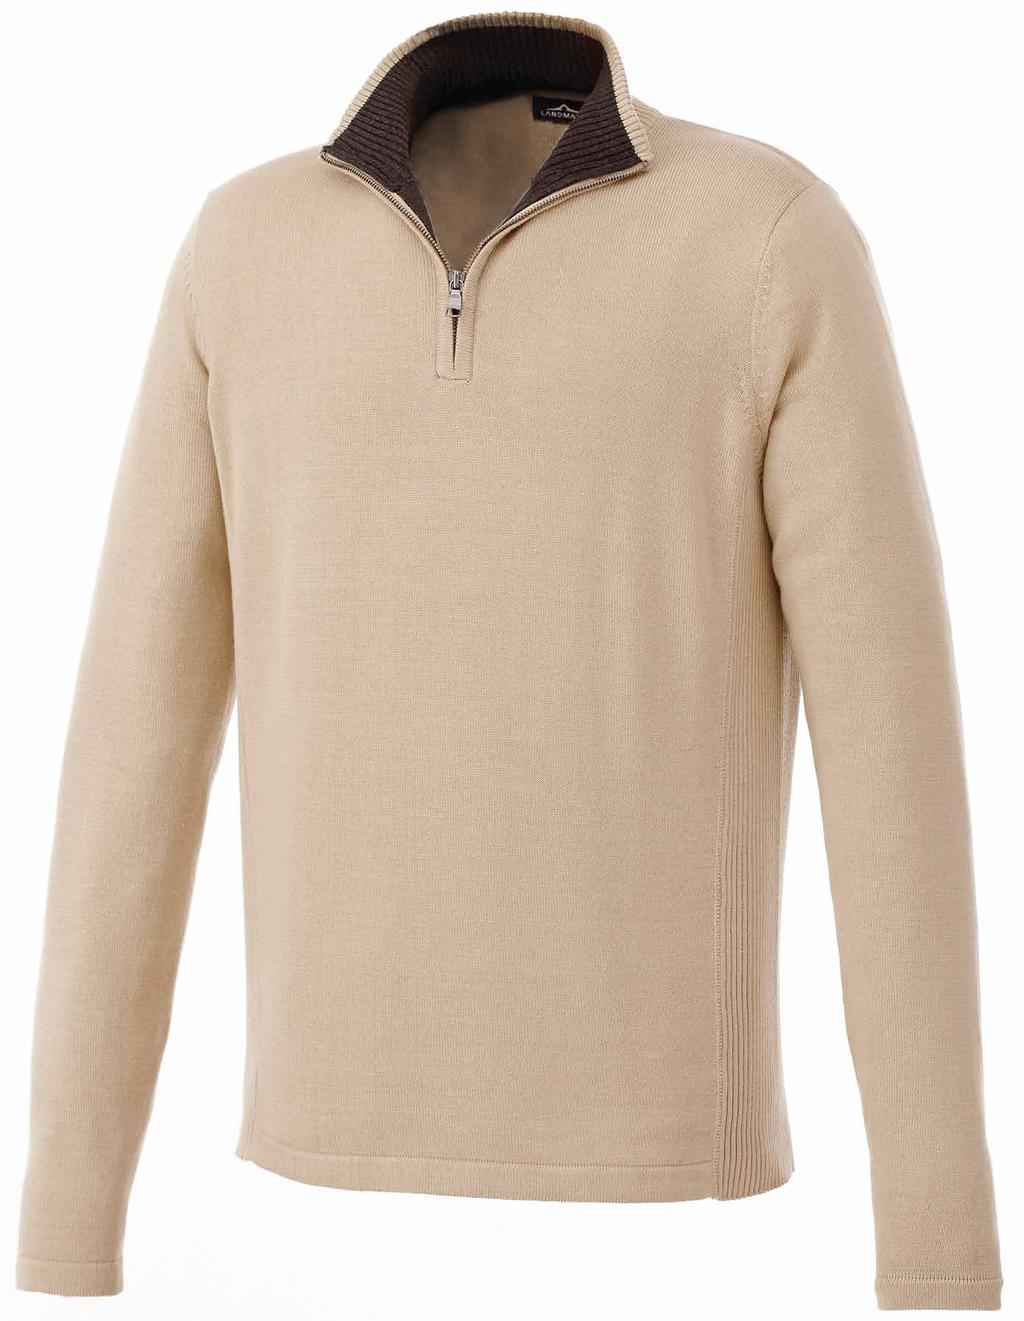 A classically styled sweater with ribbed knit collar and side panels.